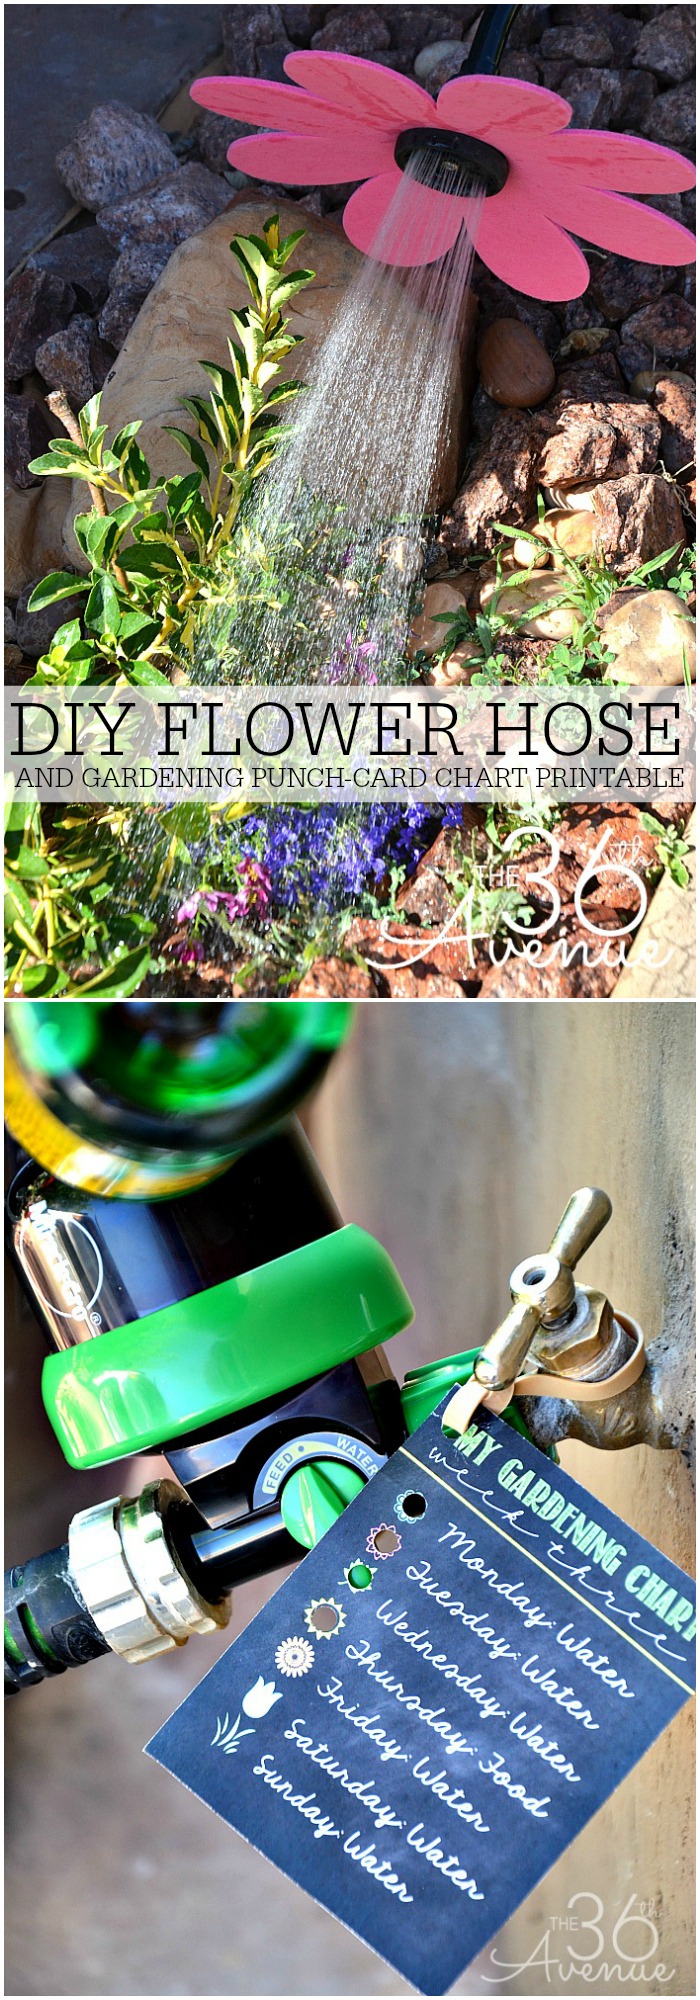 Gardening Tips - DIY Flower Hose and Gardening Chart at the36thavenue.com